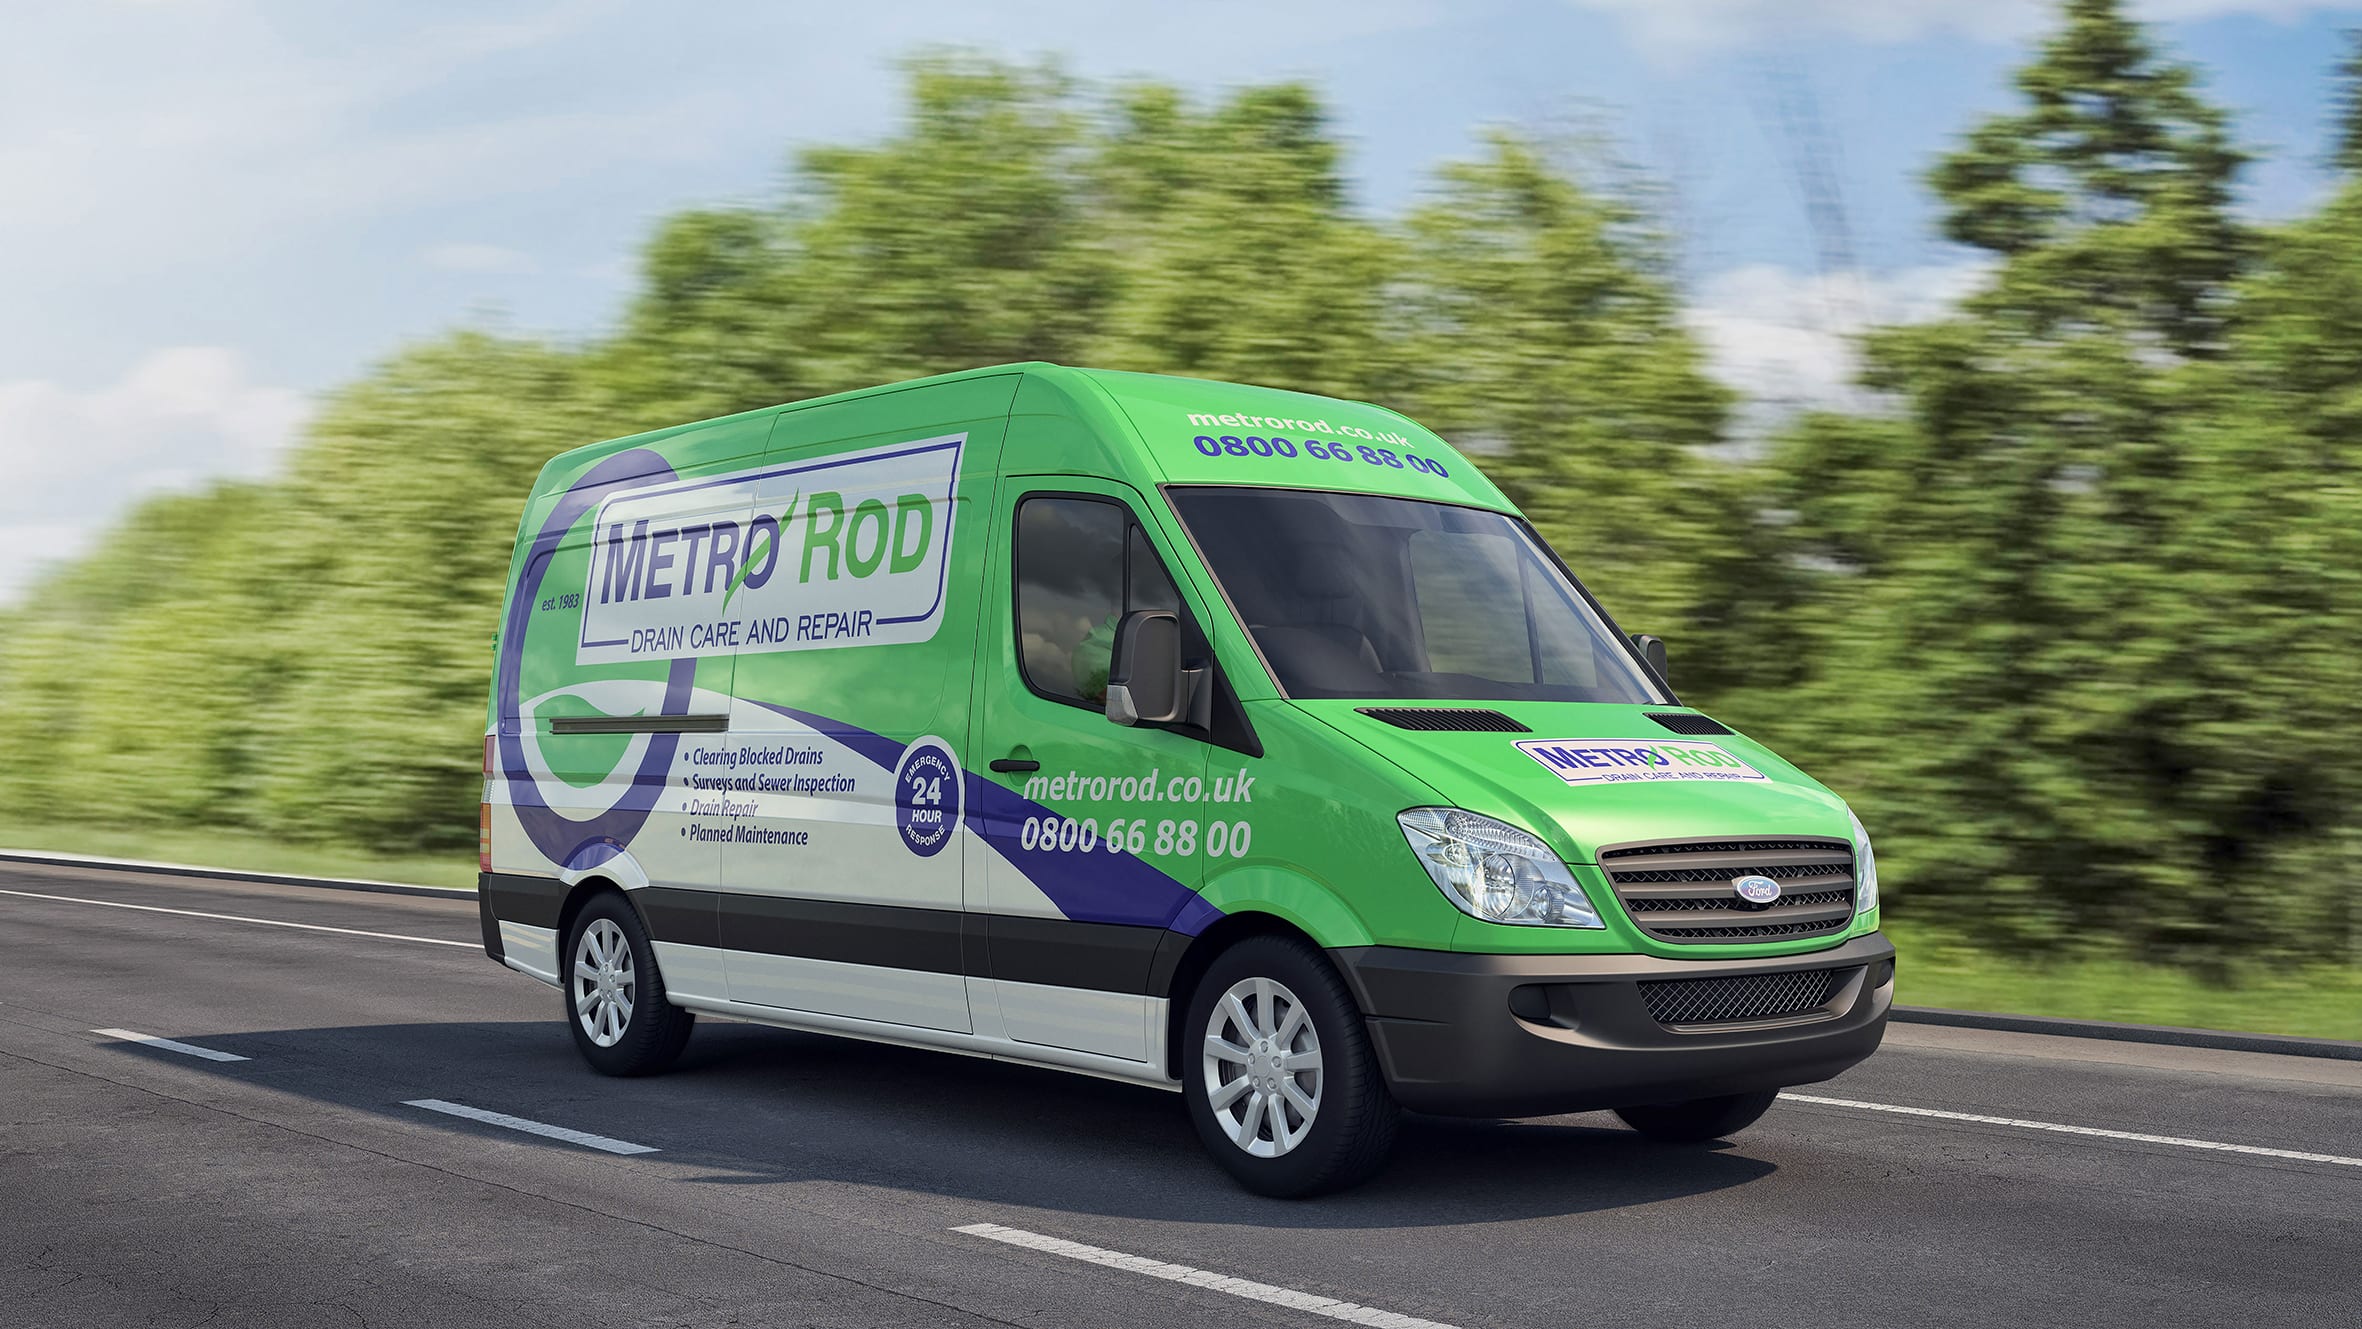 Metro Rod – Unblocking the drains in Bournemouth